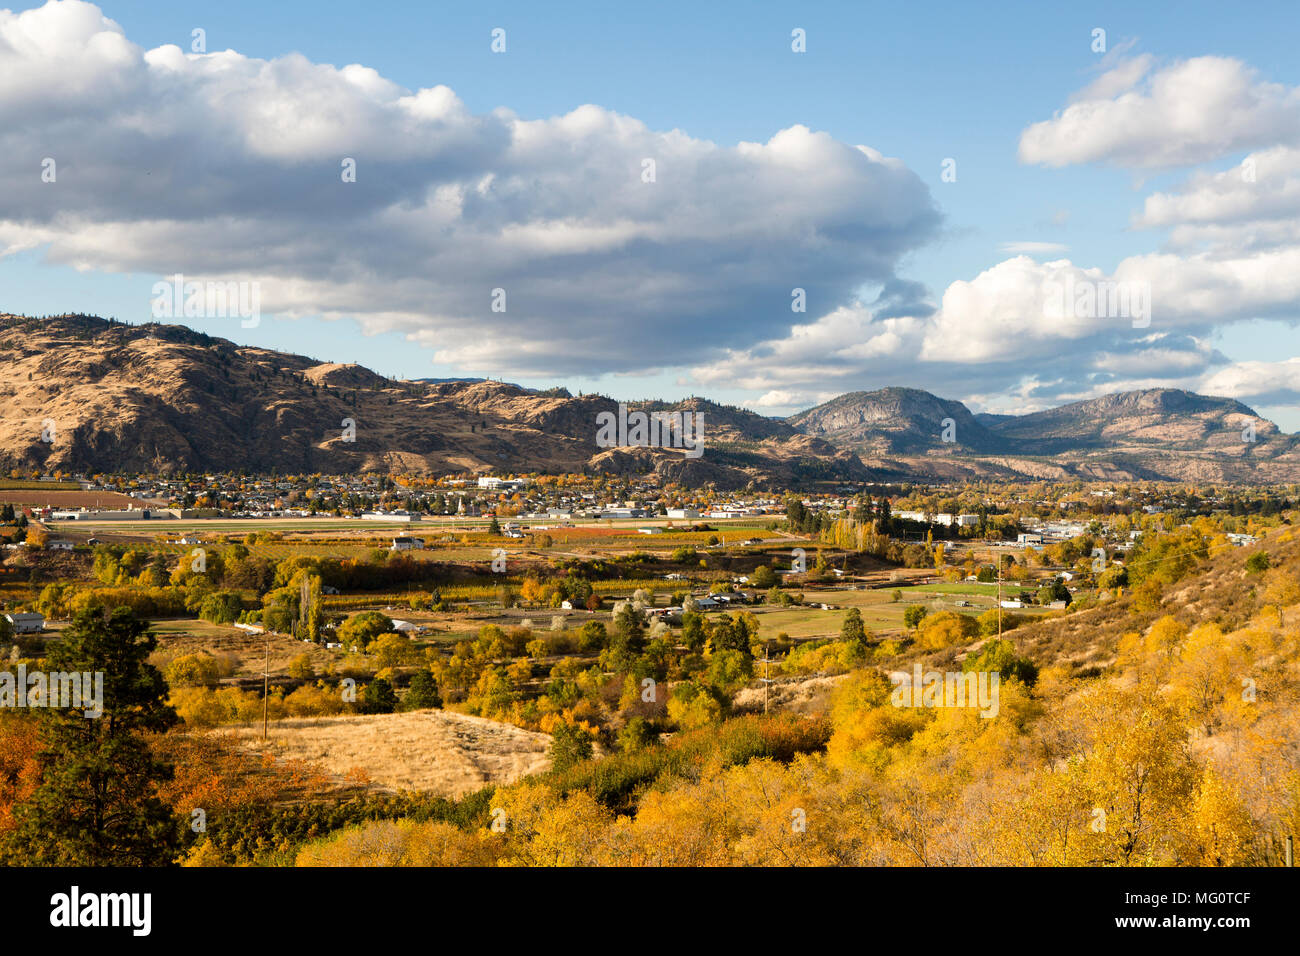 Scenic autumn view of the rural landscape of Oliver located in the Okanagan Valley of British Columbia, Canada. Stock Photo